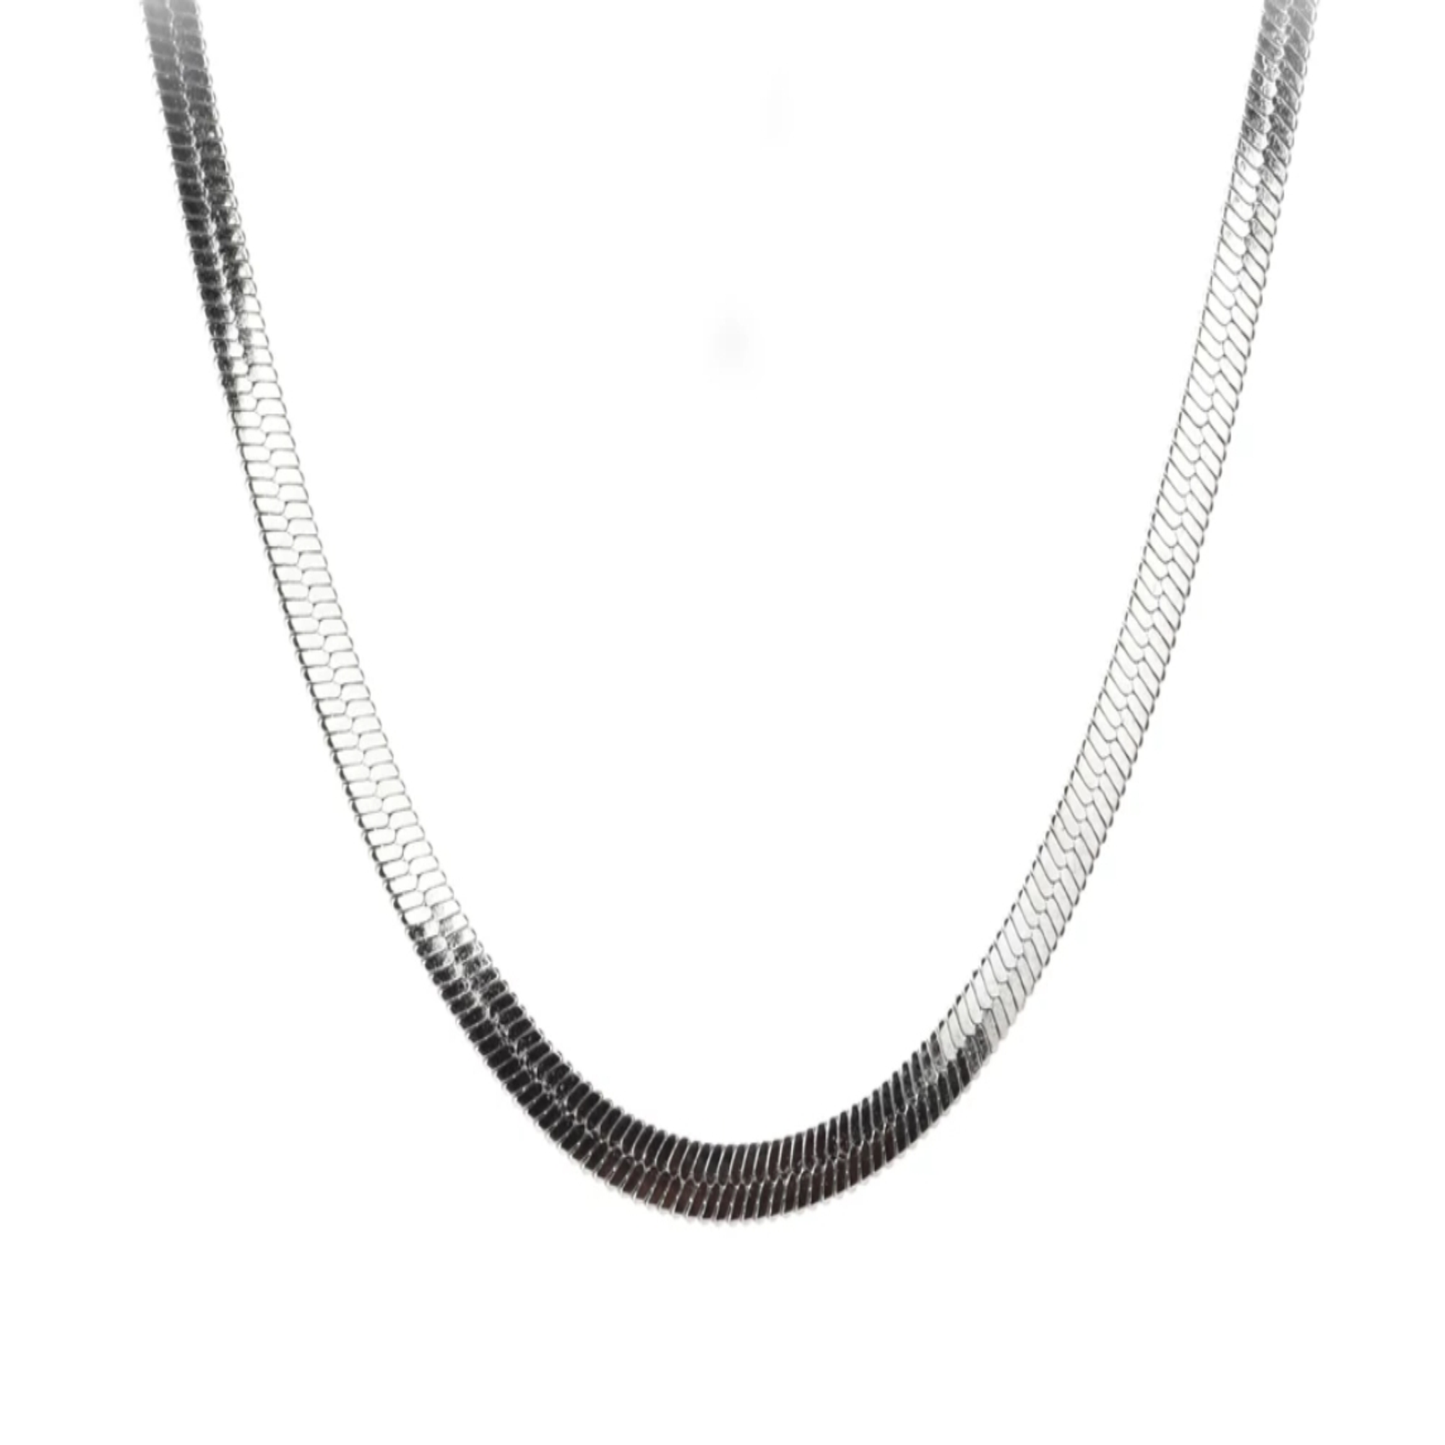 Smooth snake necklace